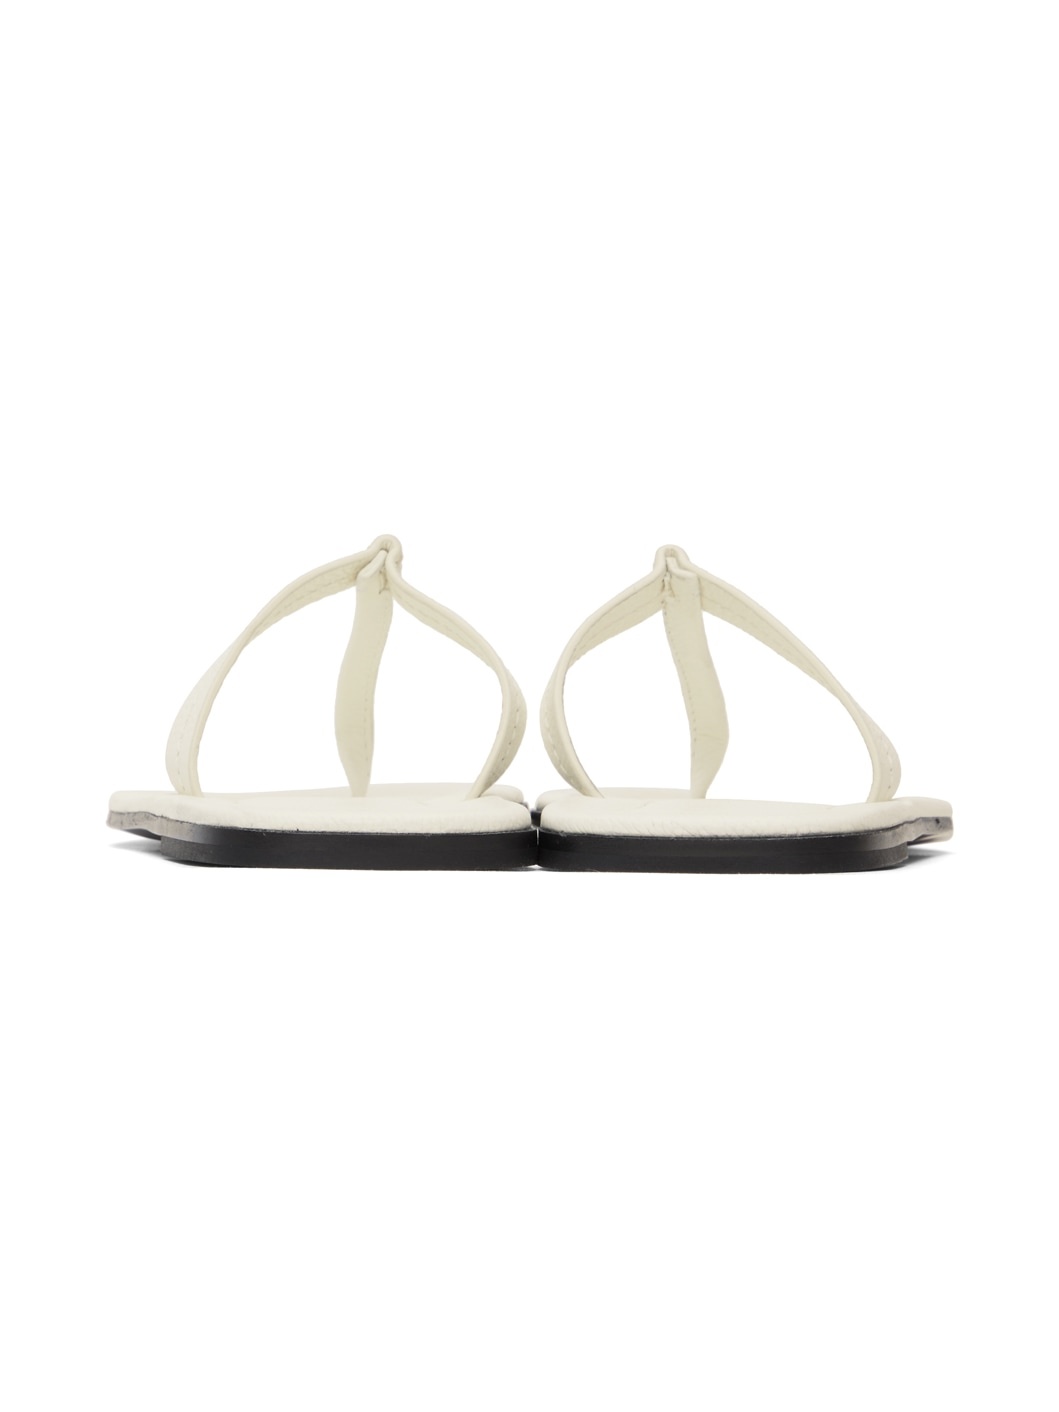 Off-White 'The T-Strap' Sandals - 2